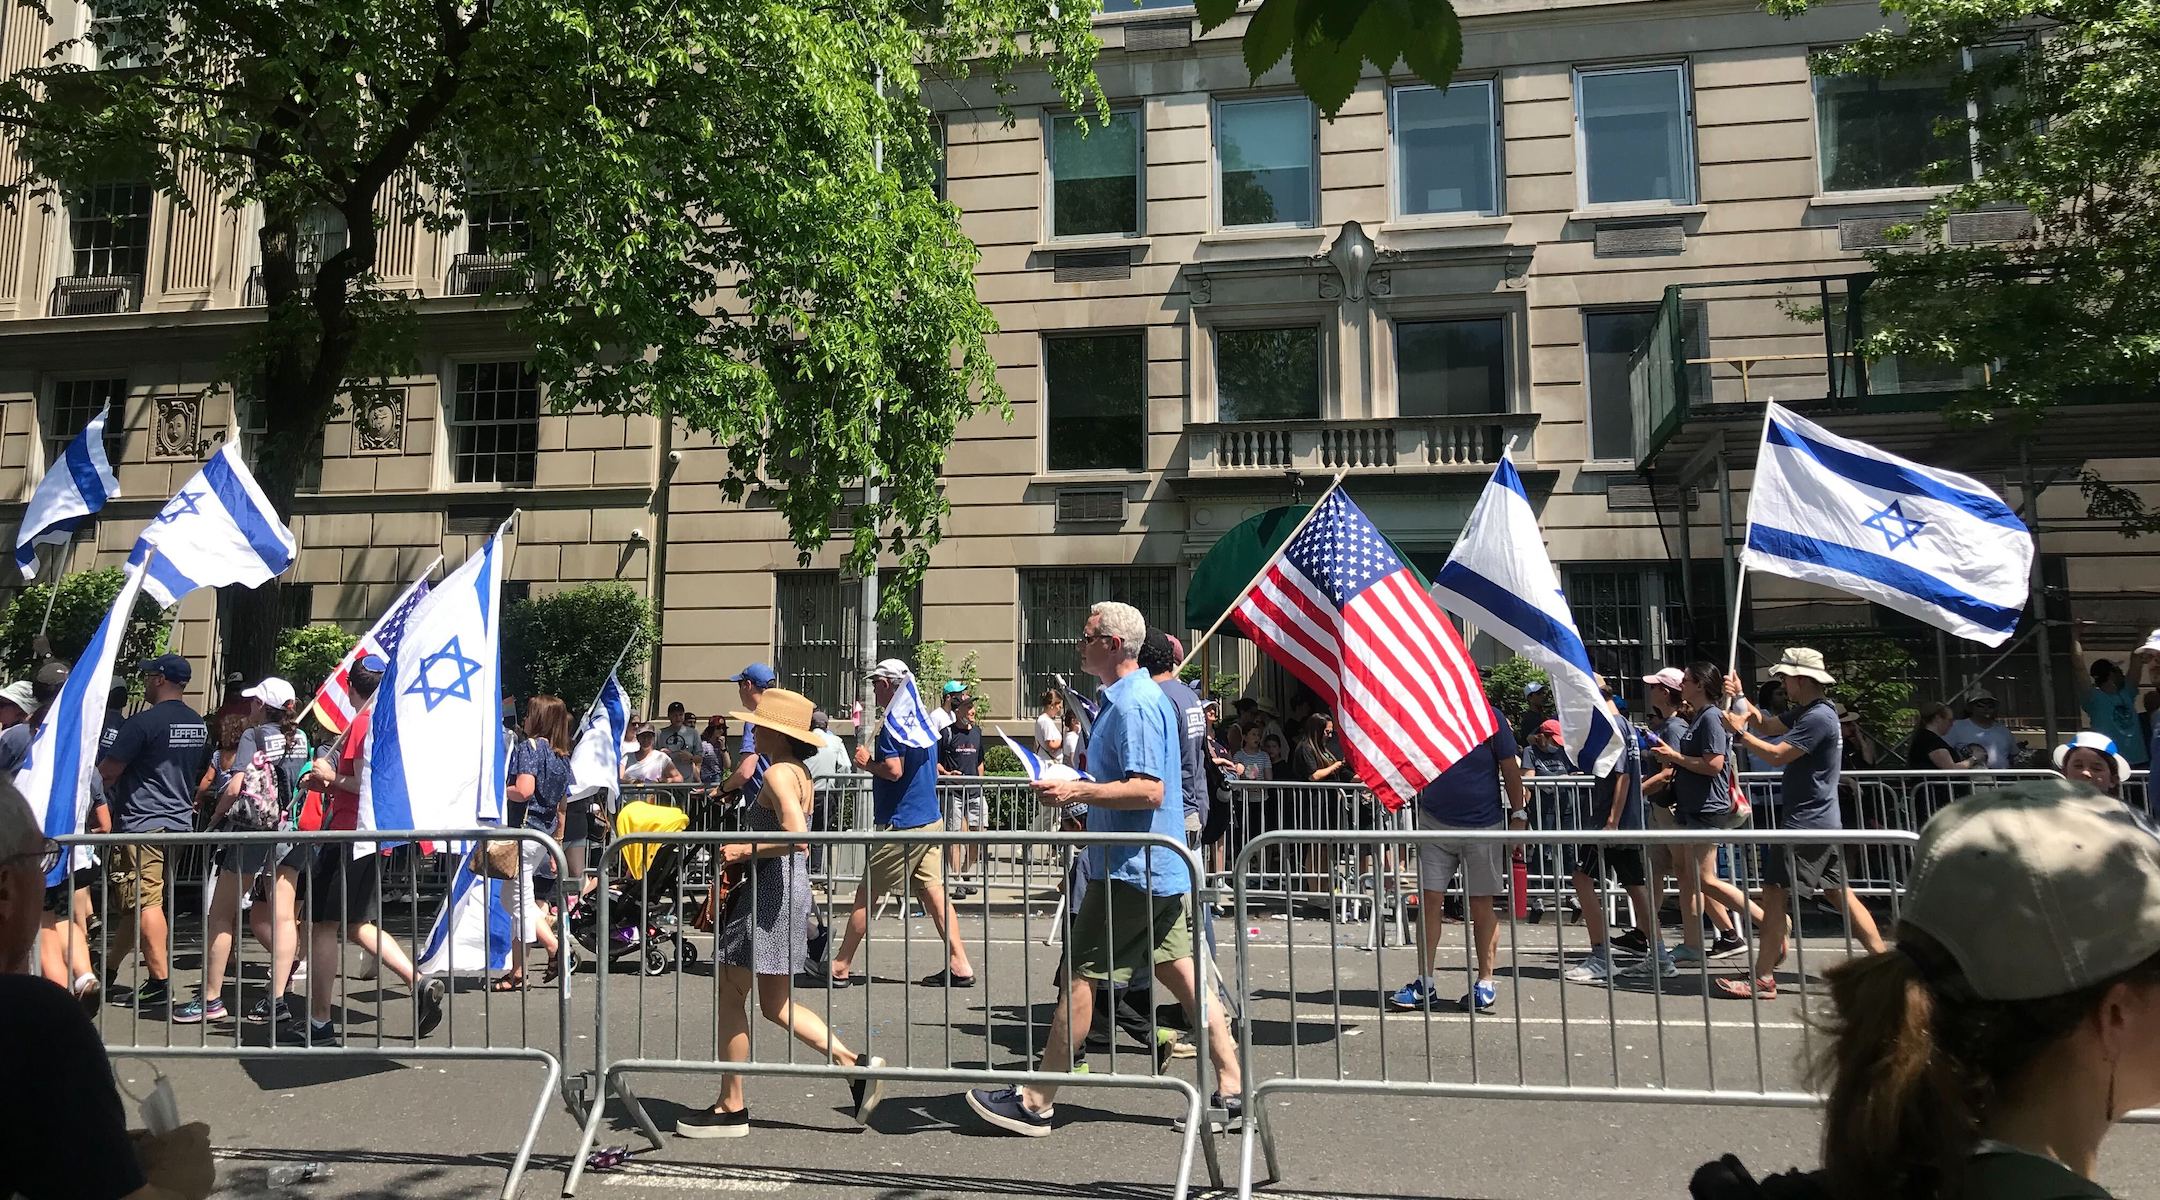 Scenes from NYC’s Celebrate Israel Parade, which drew 40,000 people